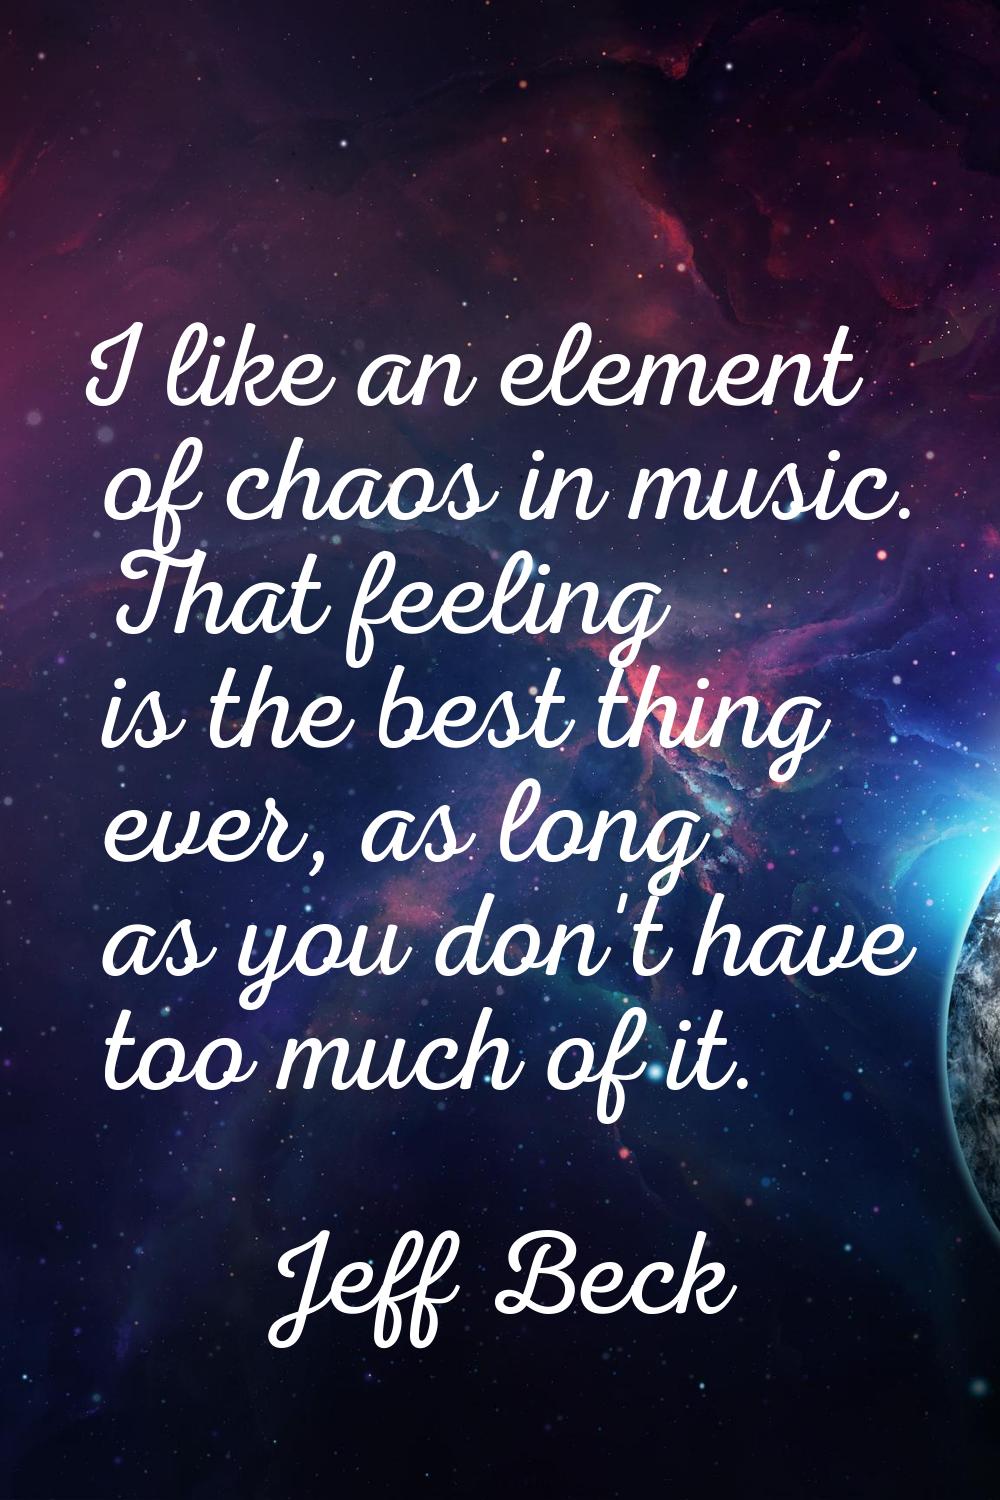 I like an element of chaos in music. That feeling is the best thing ever, as long as you don't have